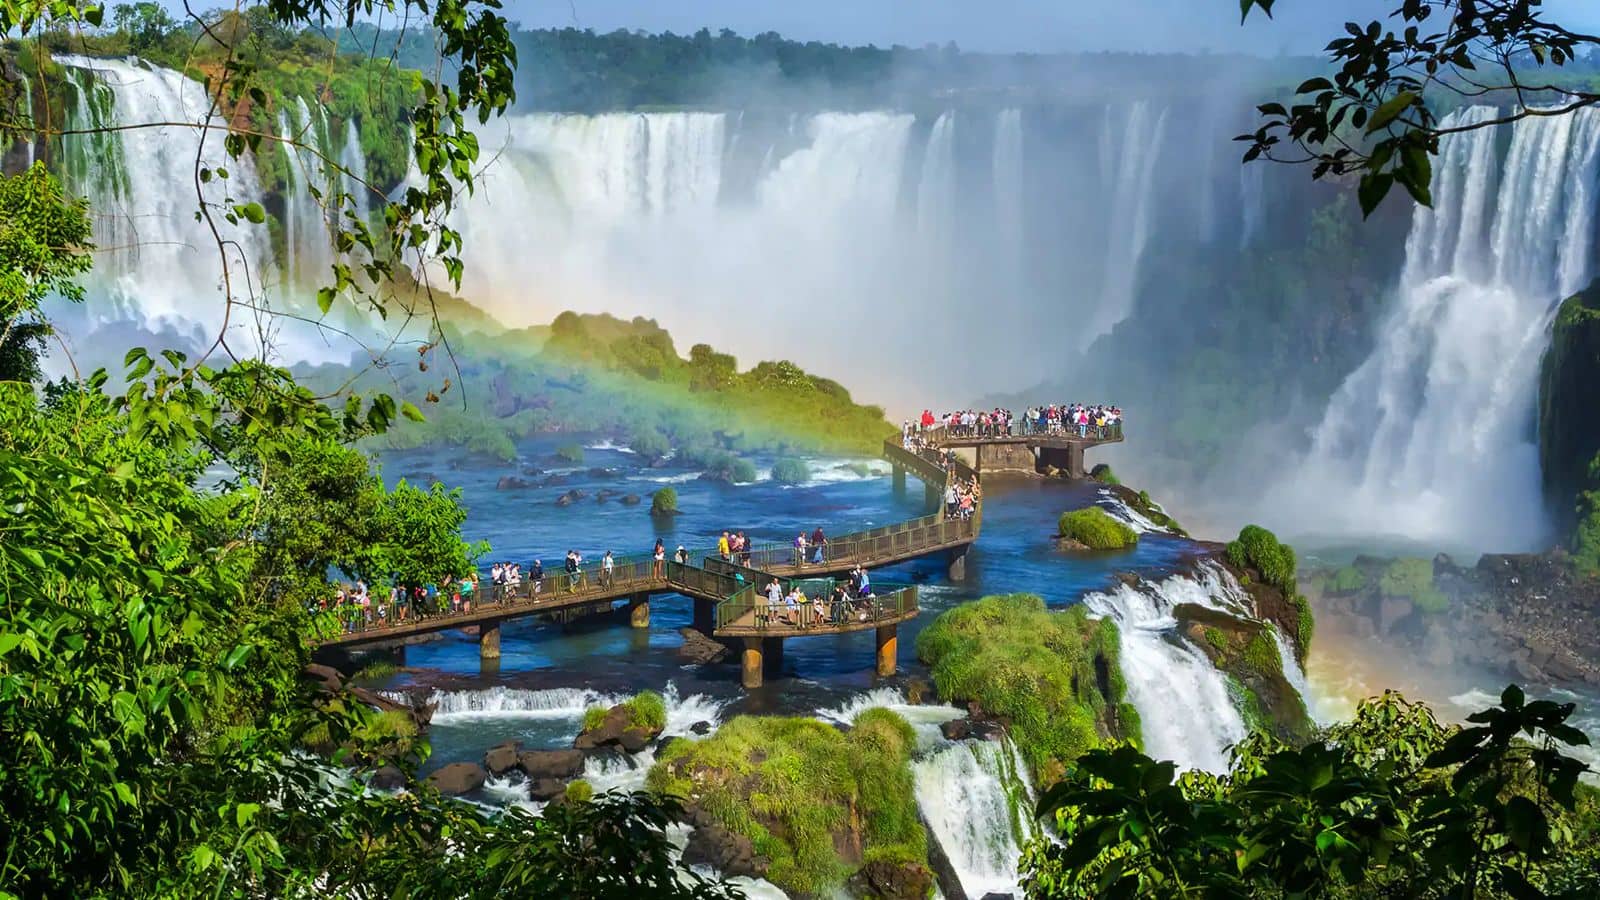 Witness Iguazu's majestic falls and exotic wildlife with this guide